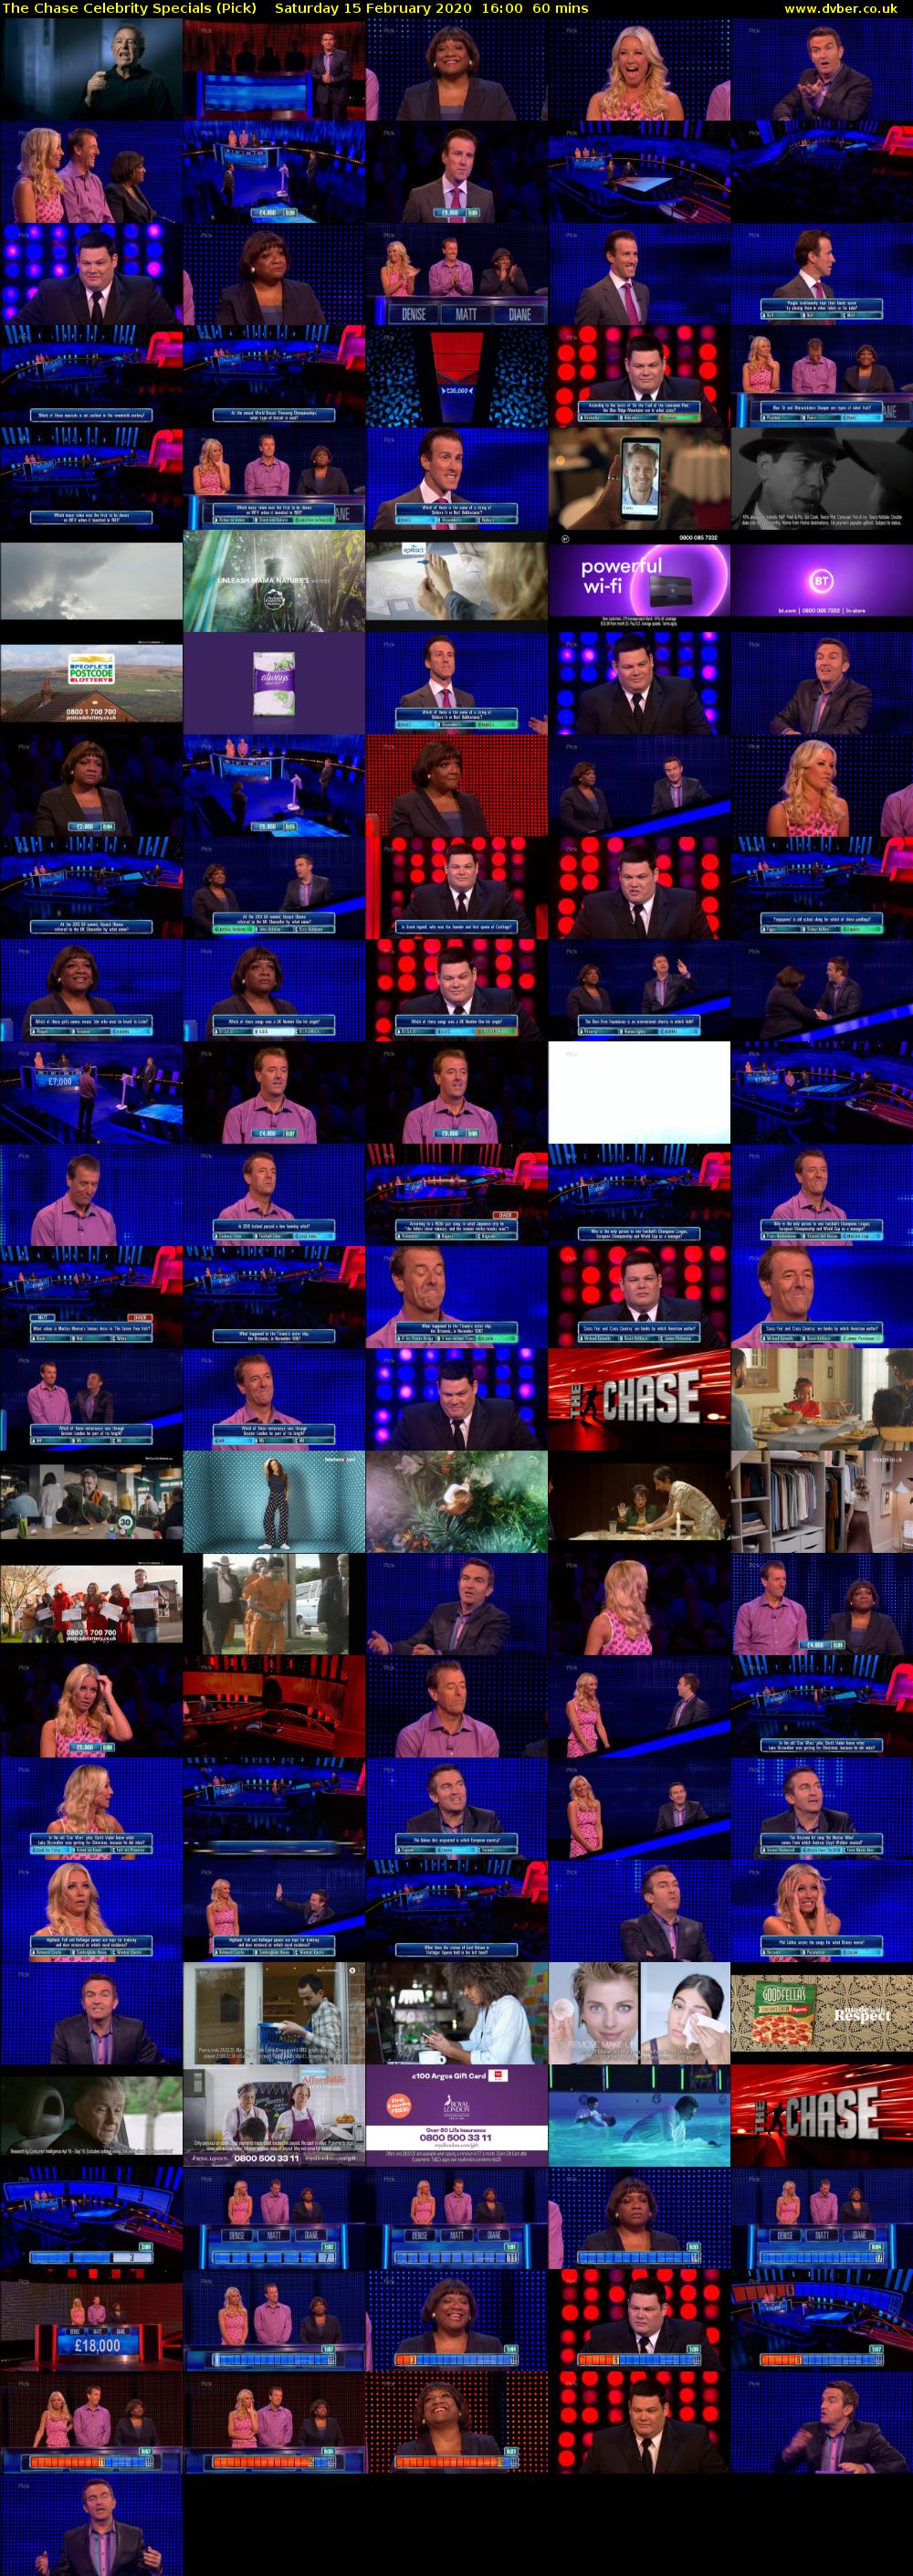 The Chase Celebrity Specials (Pick) Saturday 15 February 2020 16:00 - 17:00